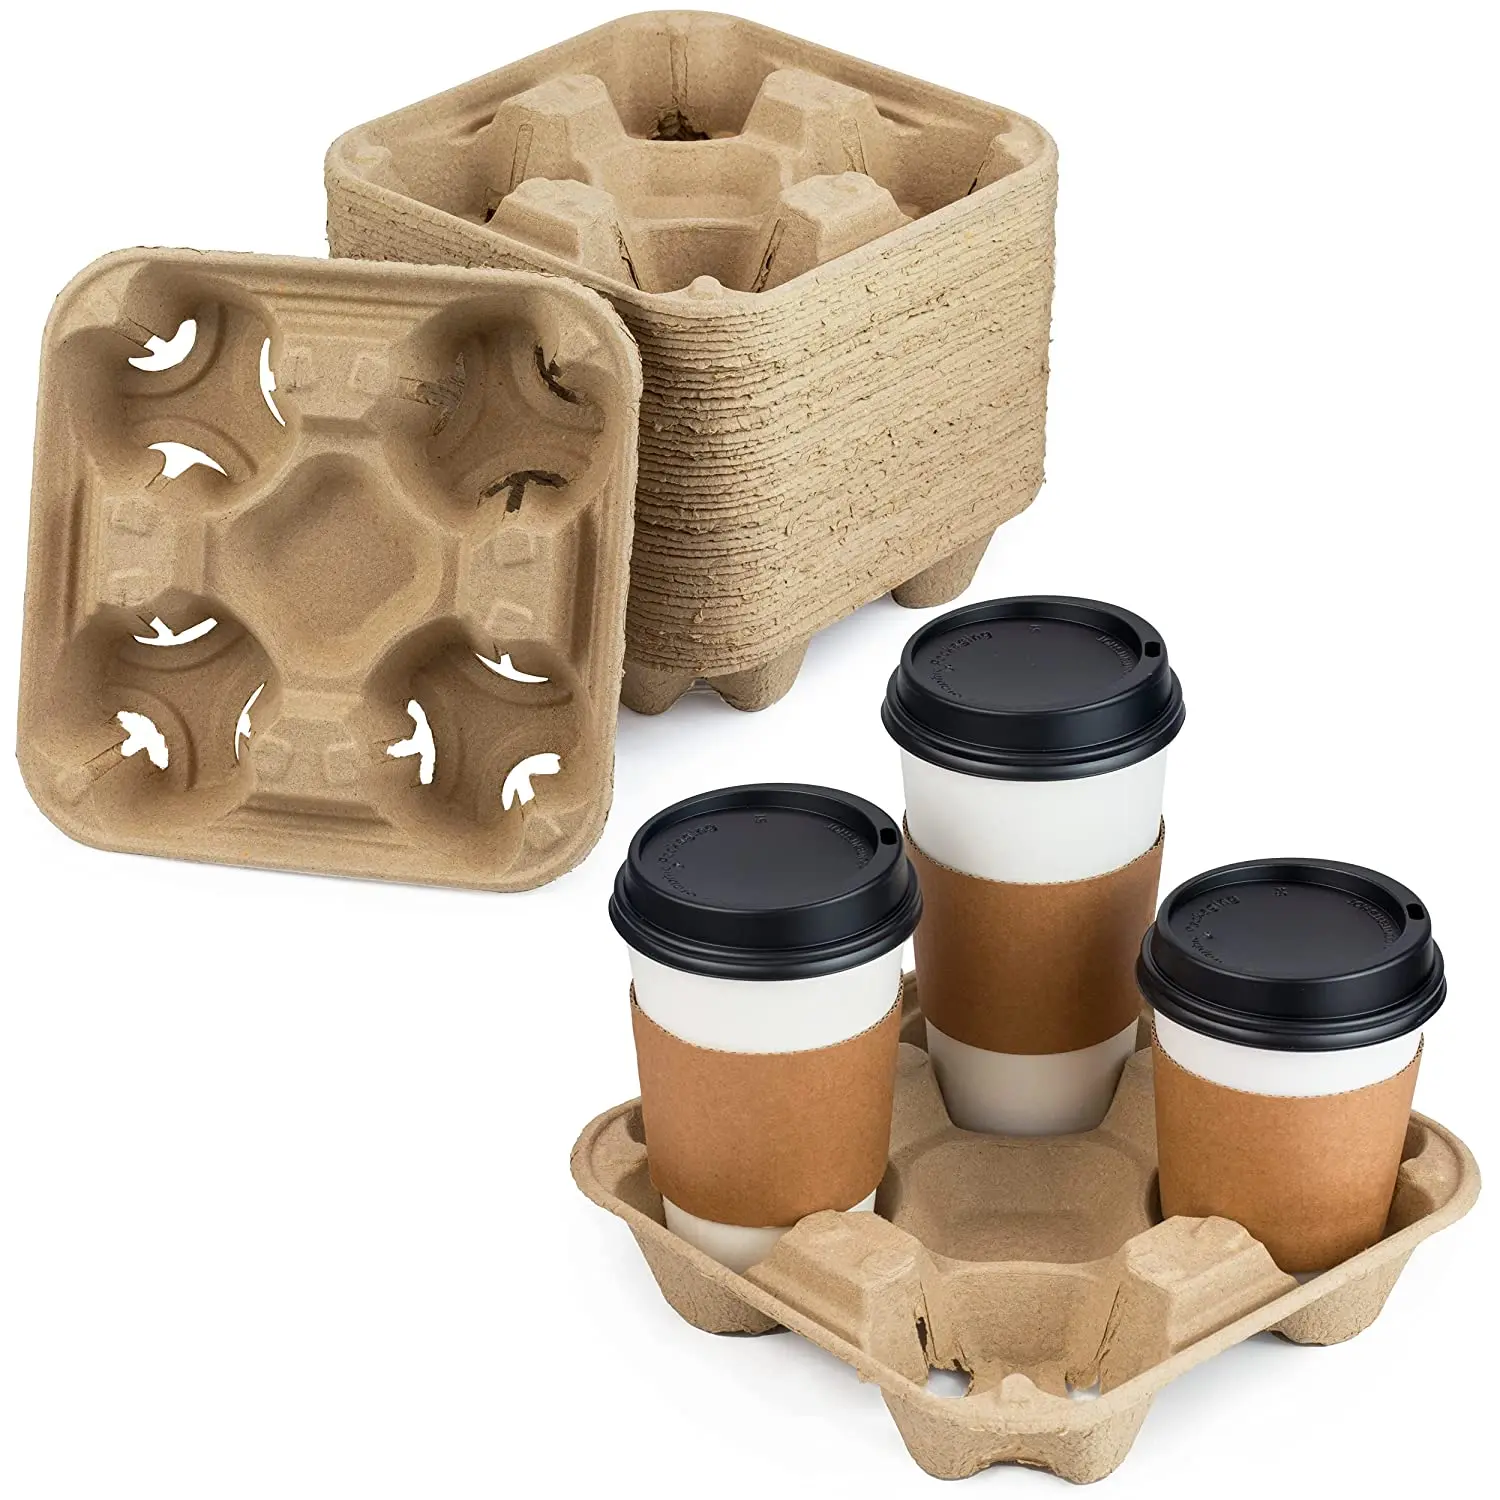 Source Corrugated Cardboard Box Coffee Drink 2 4 Cup Holder Tray Cup  Carrier Holders Paper Cups on m.